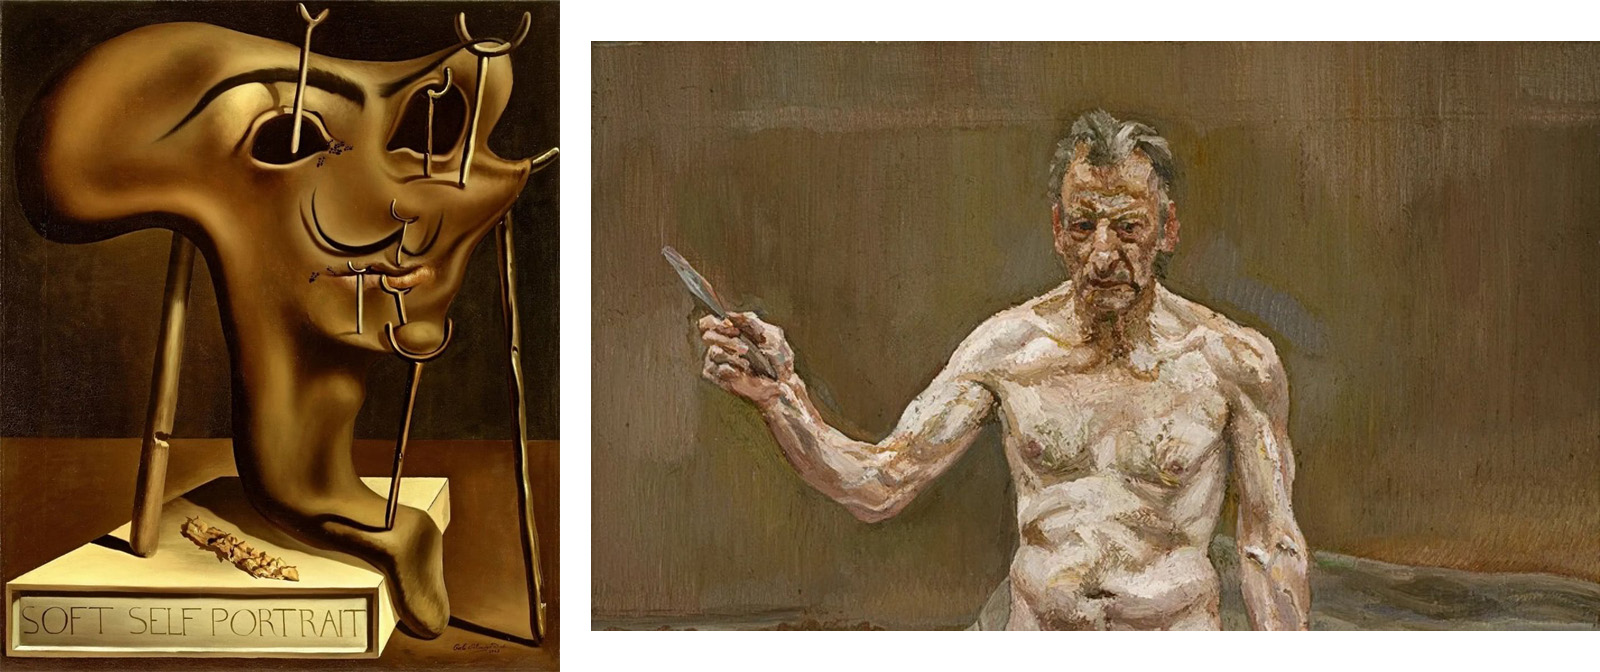 Strange self-portraits by famous artists that delight and bewilder.